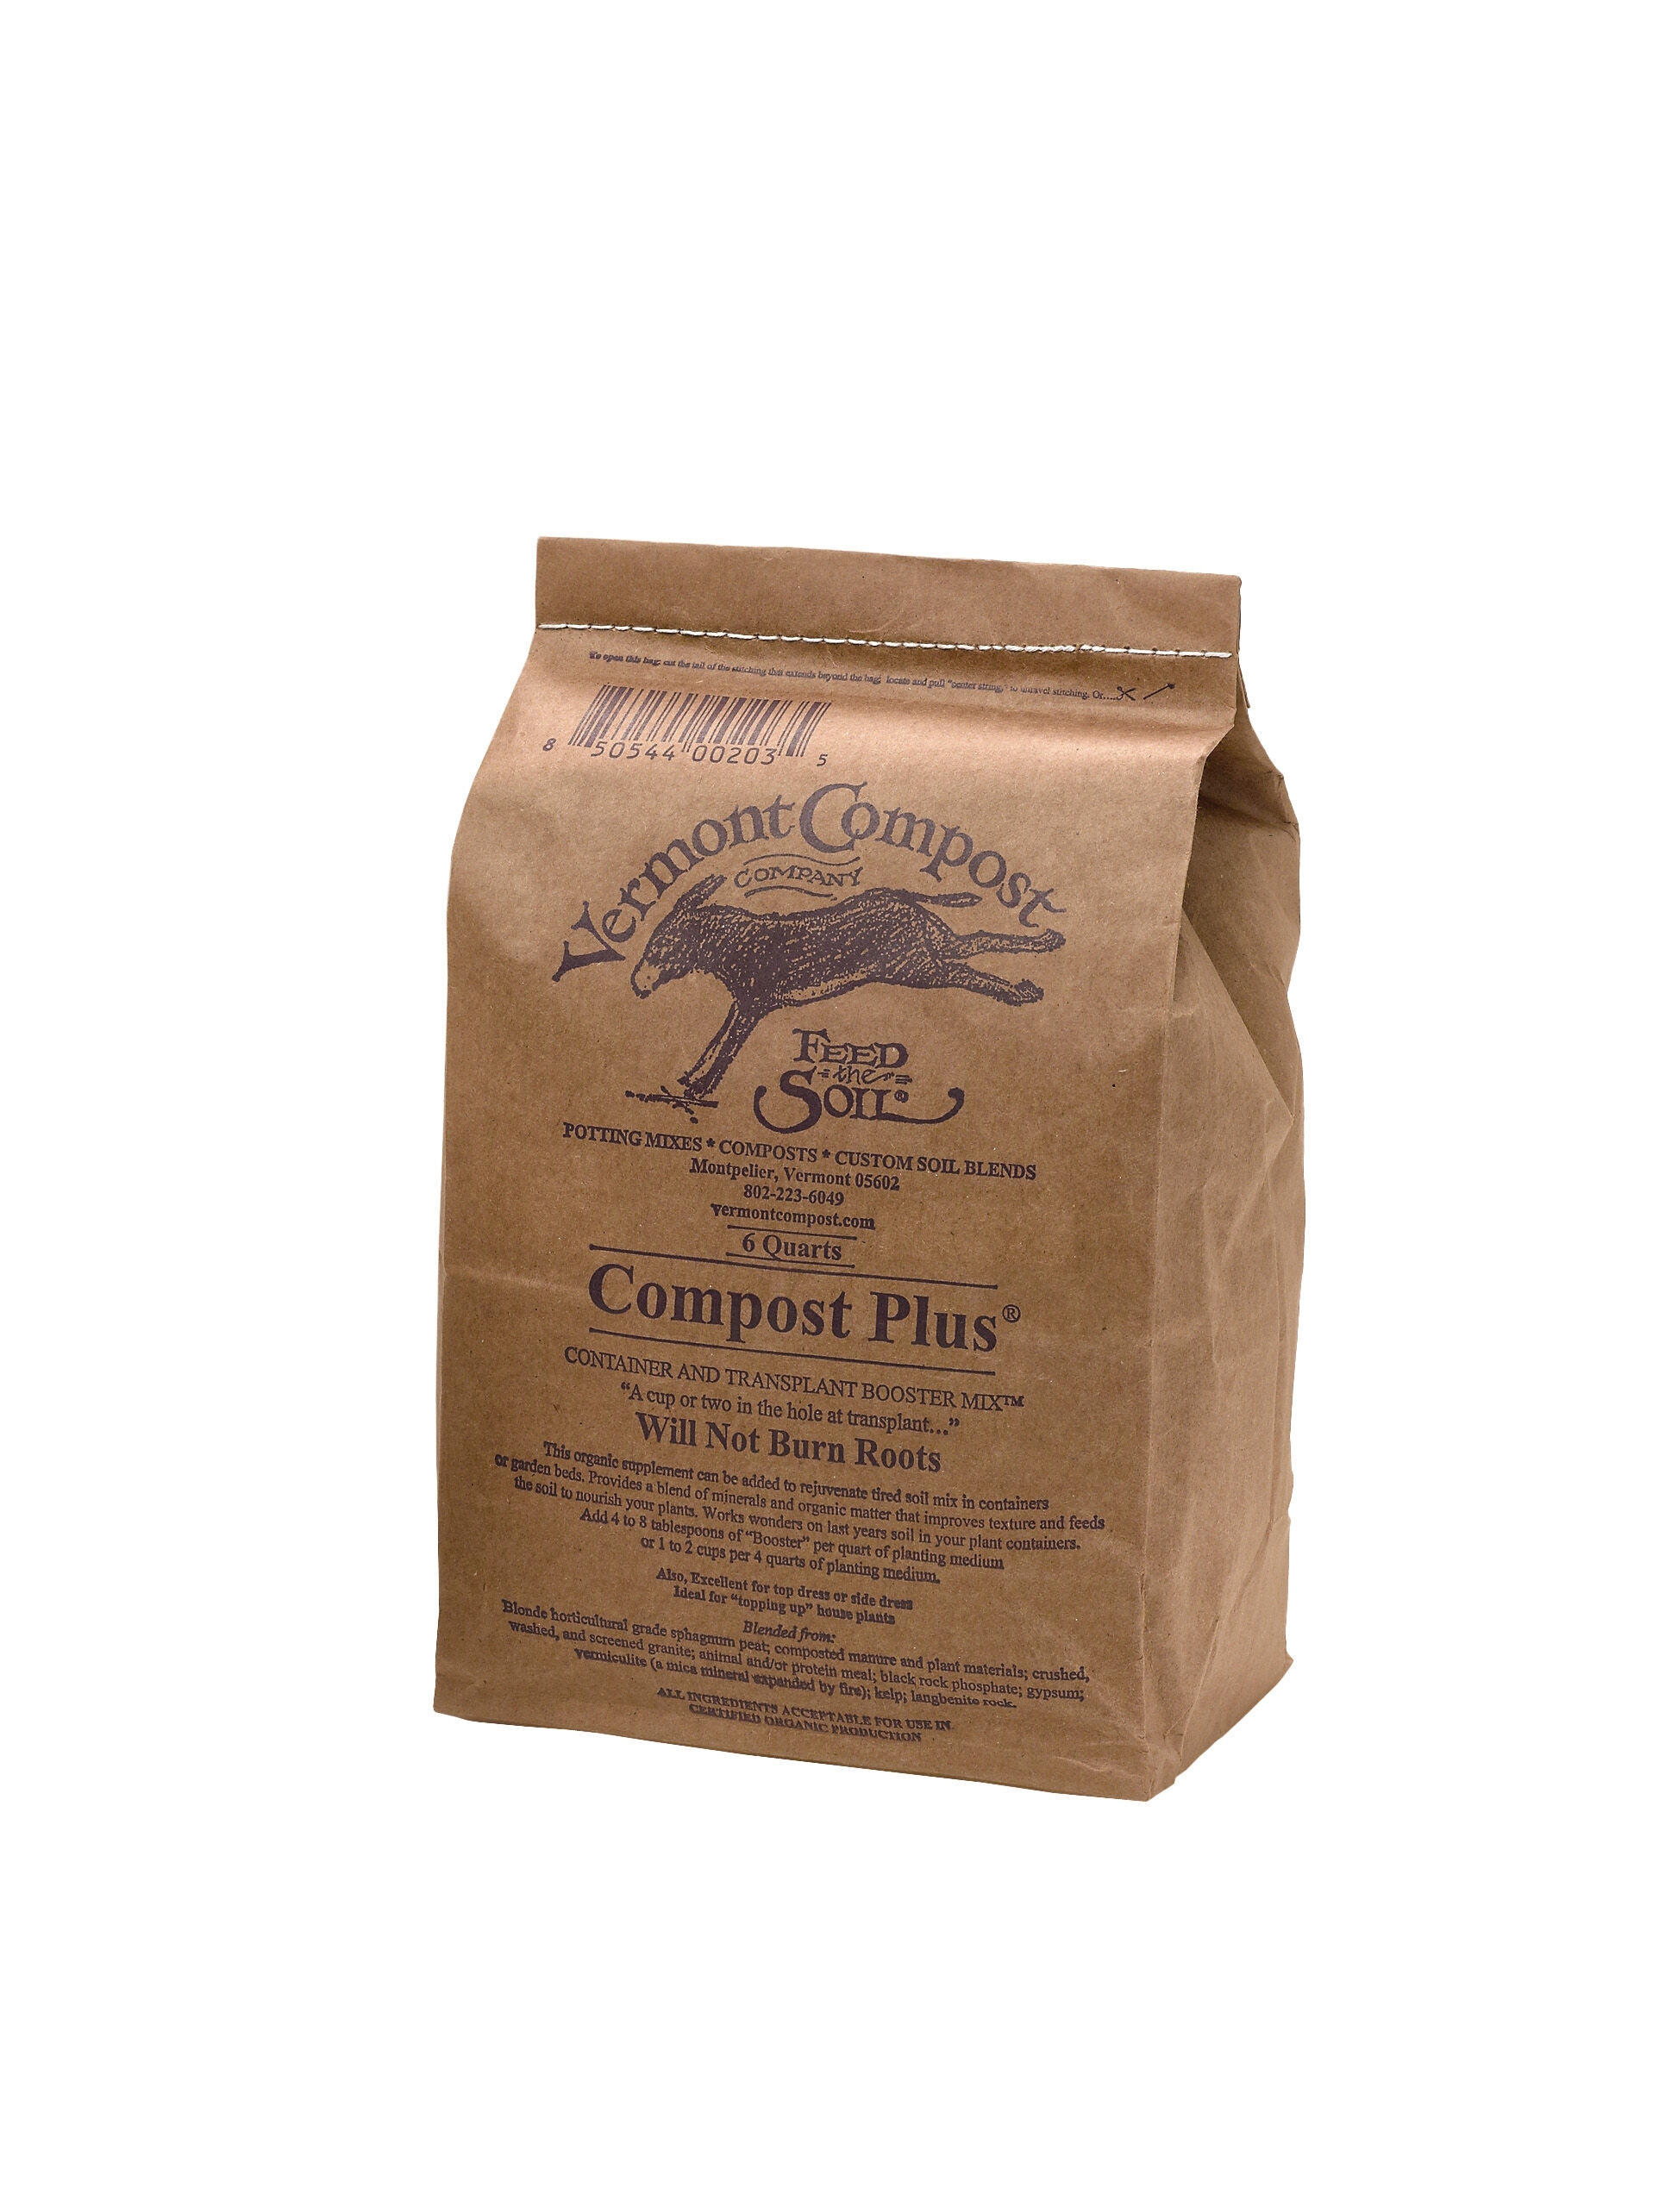 Container Booster Compost Mix, 6 Qts.